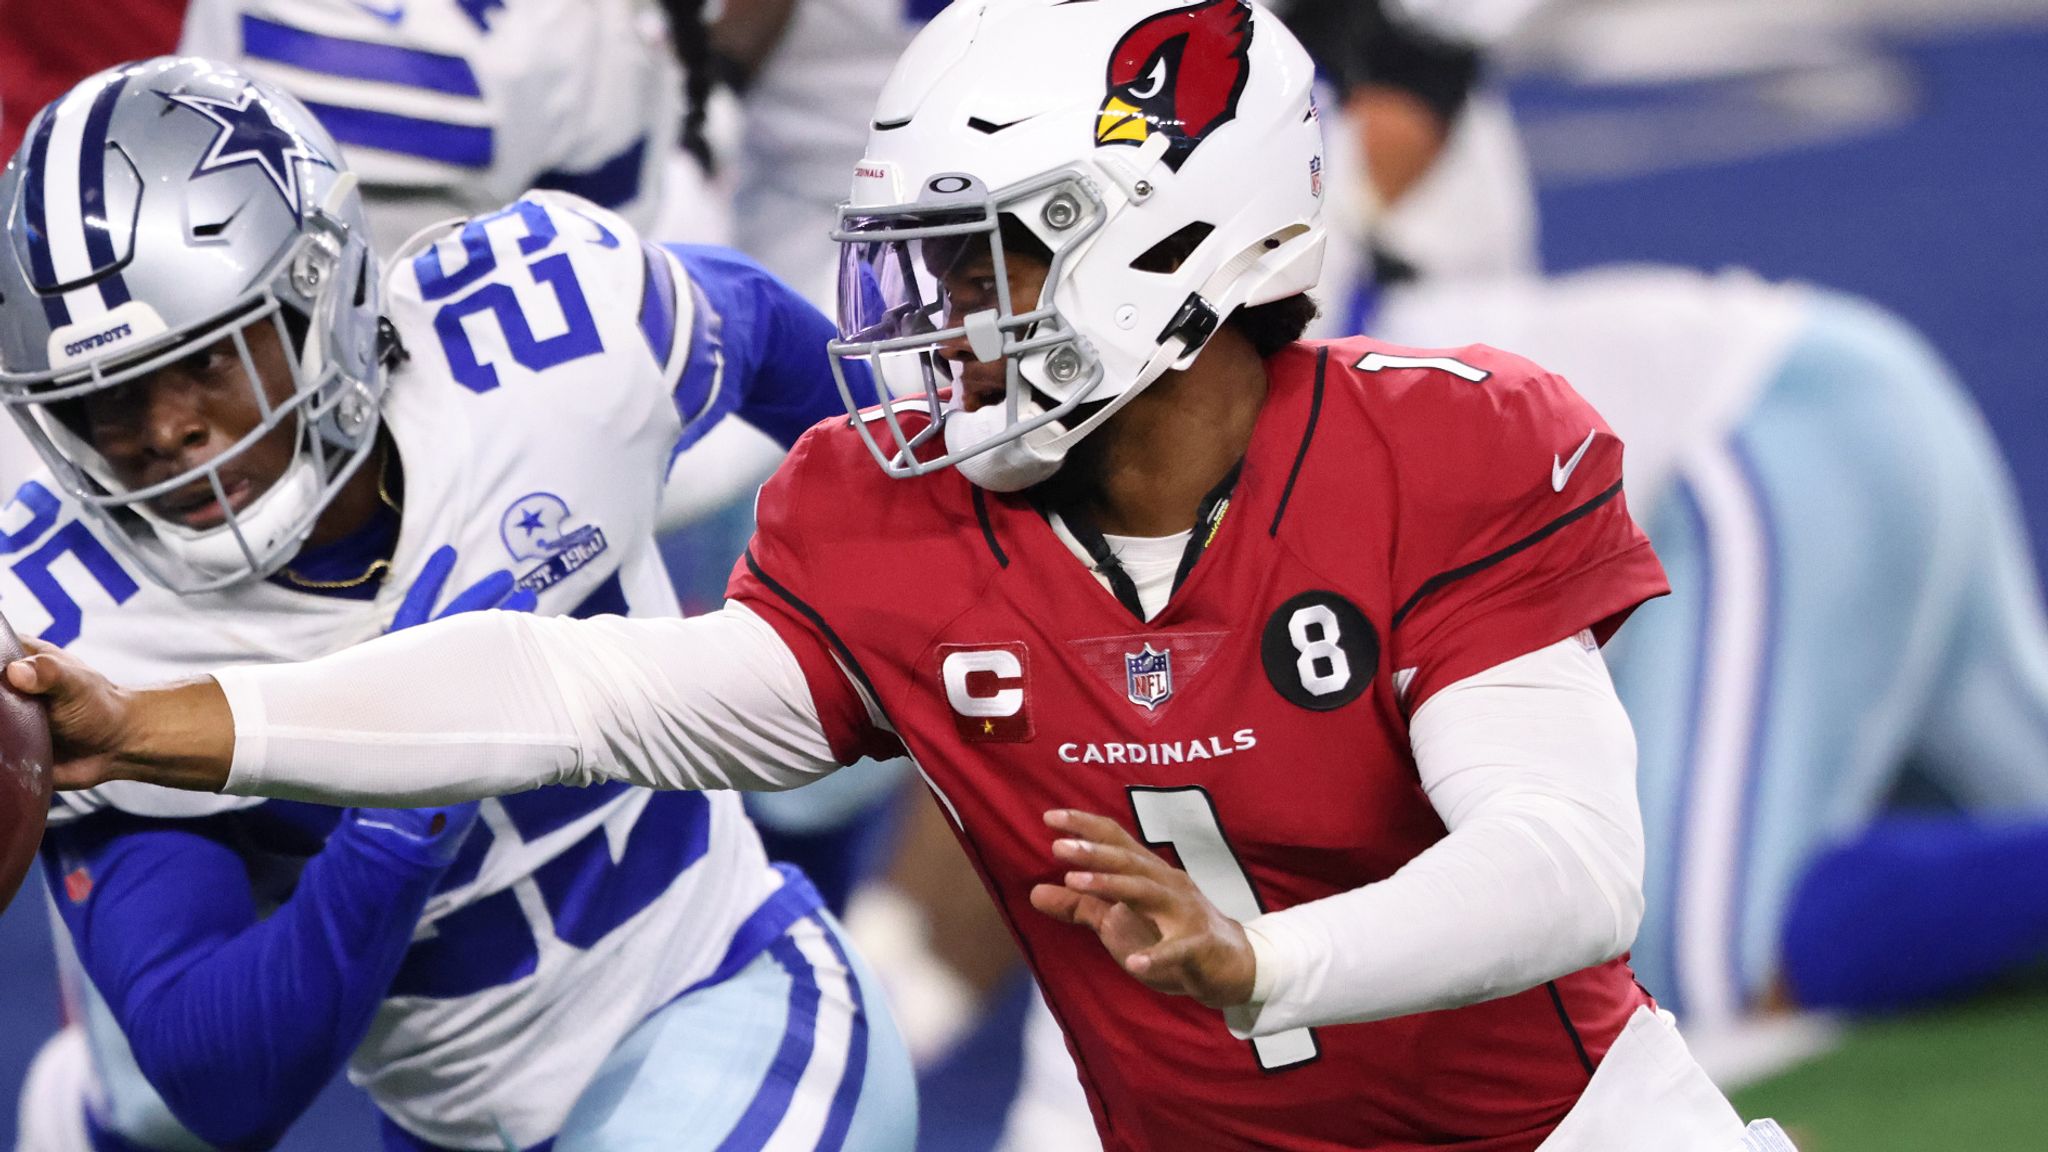 Murray leads Cardinals to 38-10 win over Dallas Cowboys